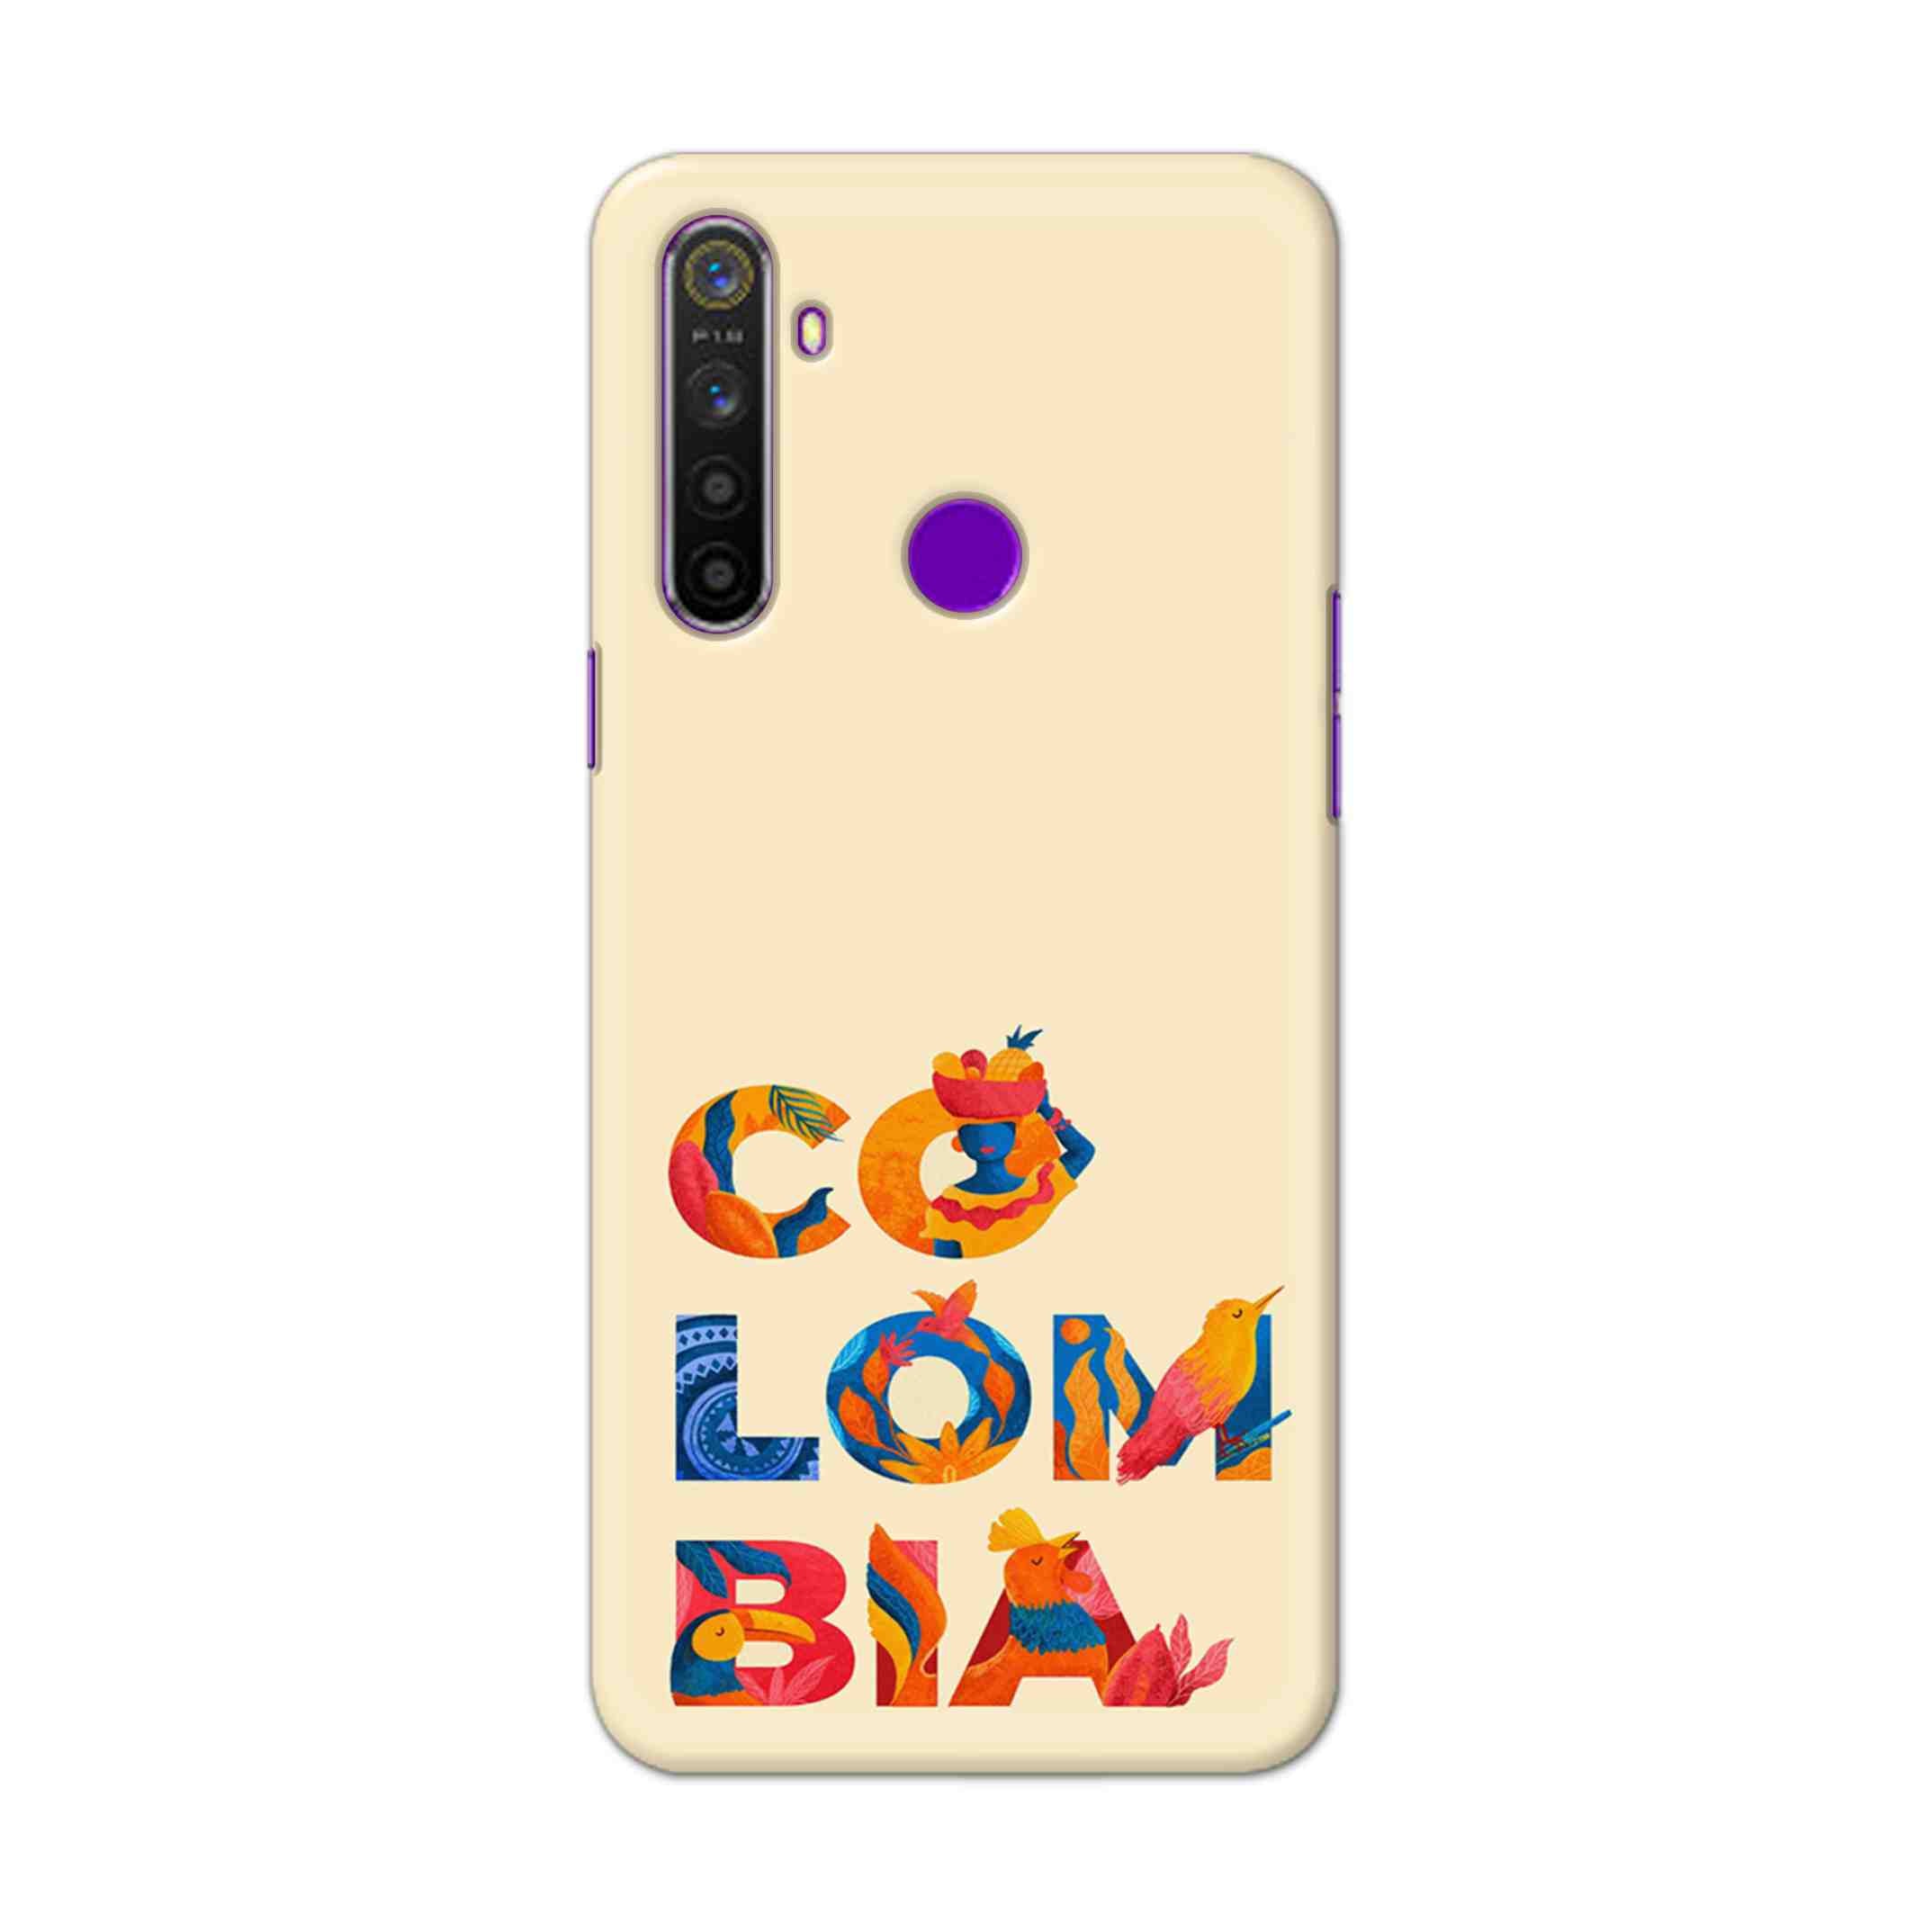 Buy Colombia Hard Back Mobile Phone Case Cover For Realme 5 Online